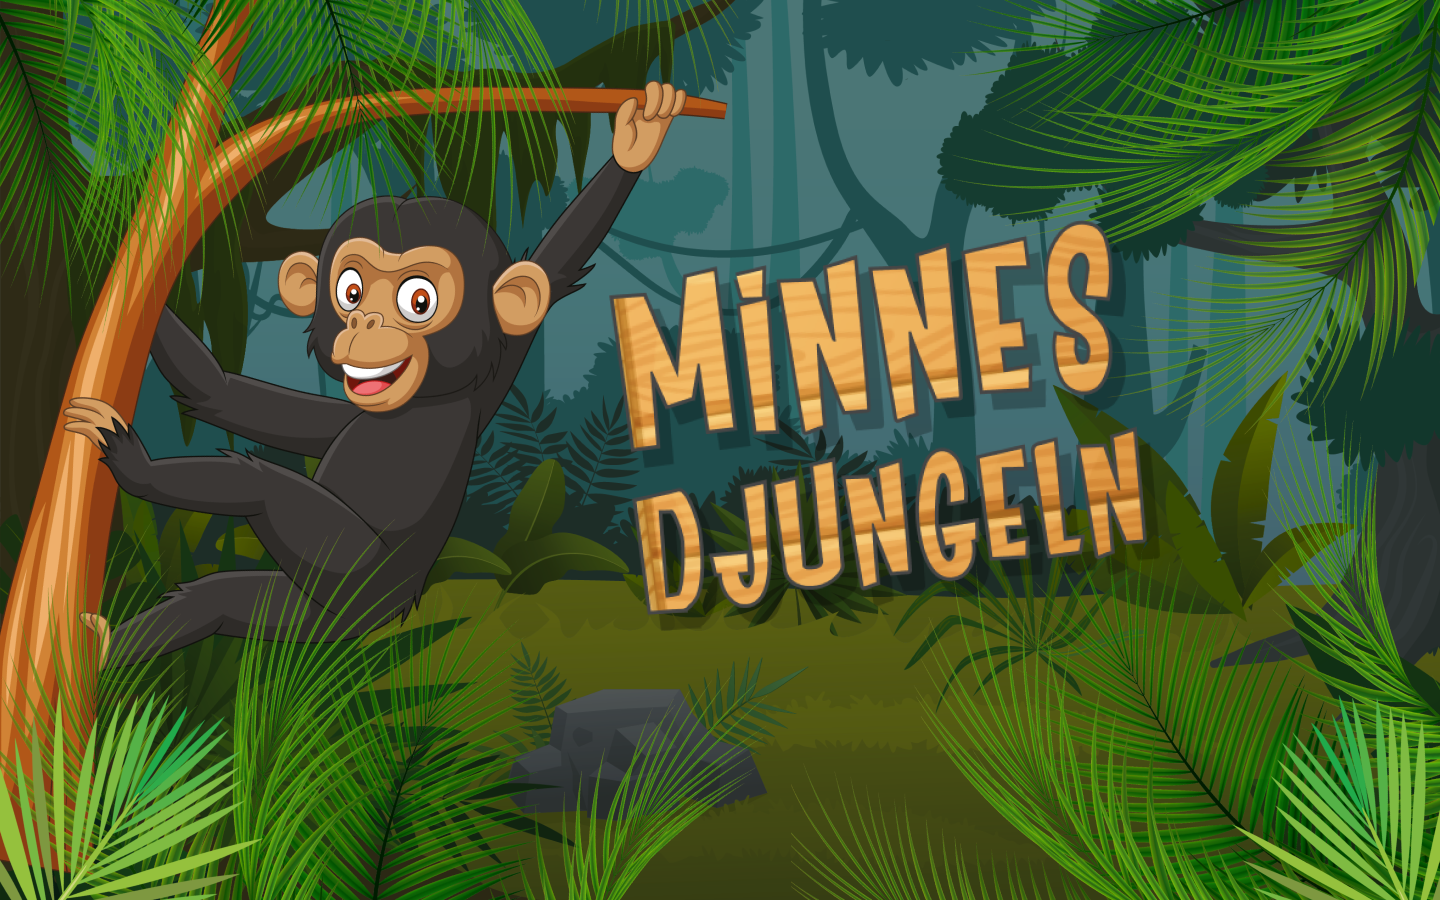 Thumbnail for the project MinniesDjungeln